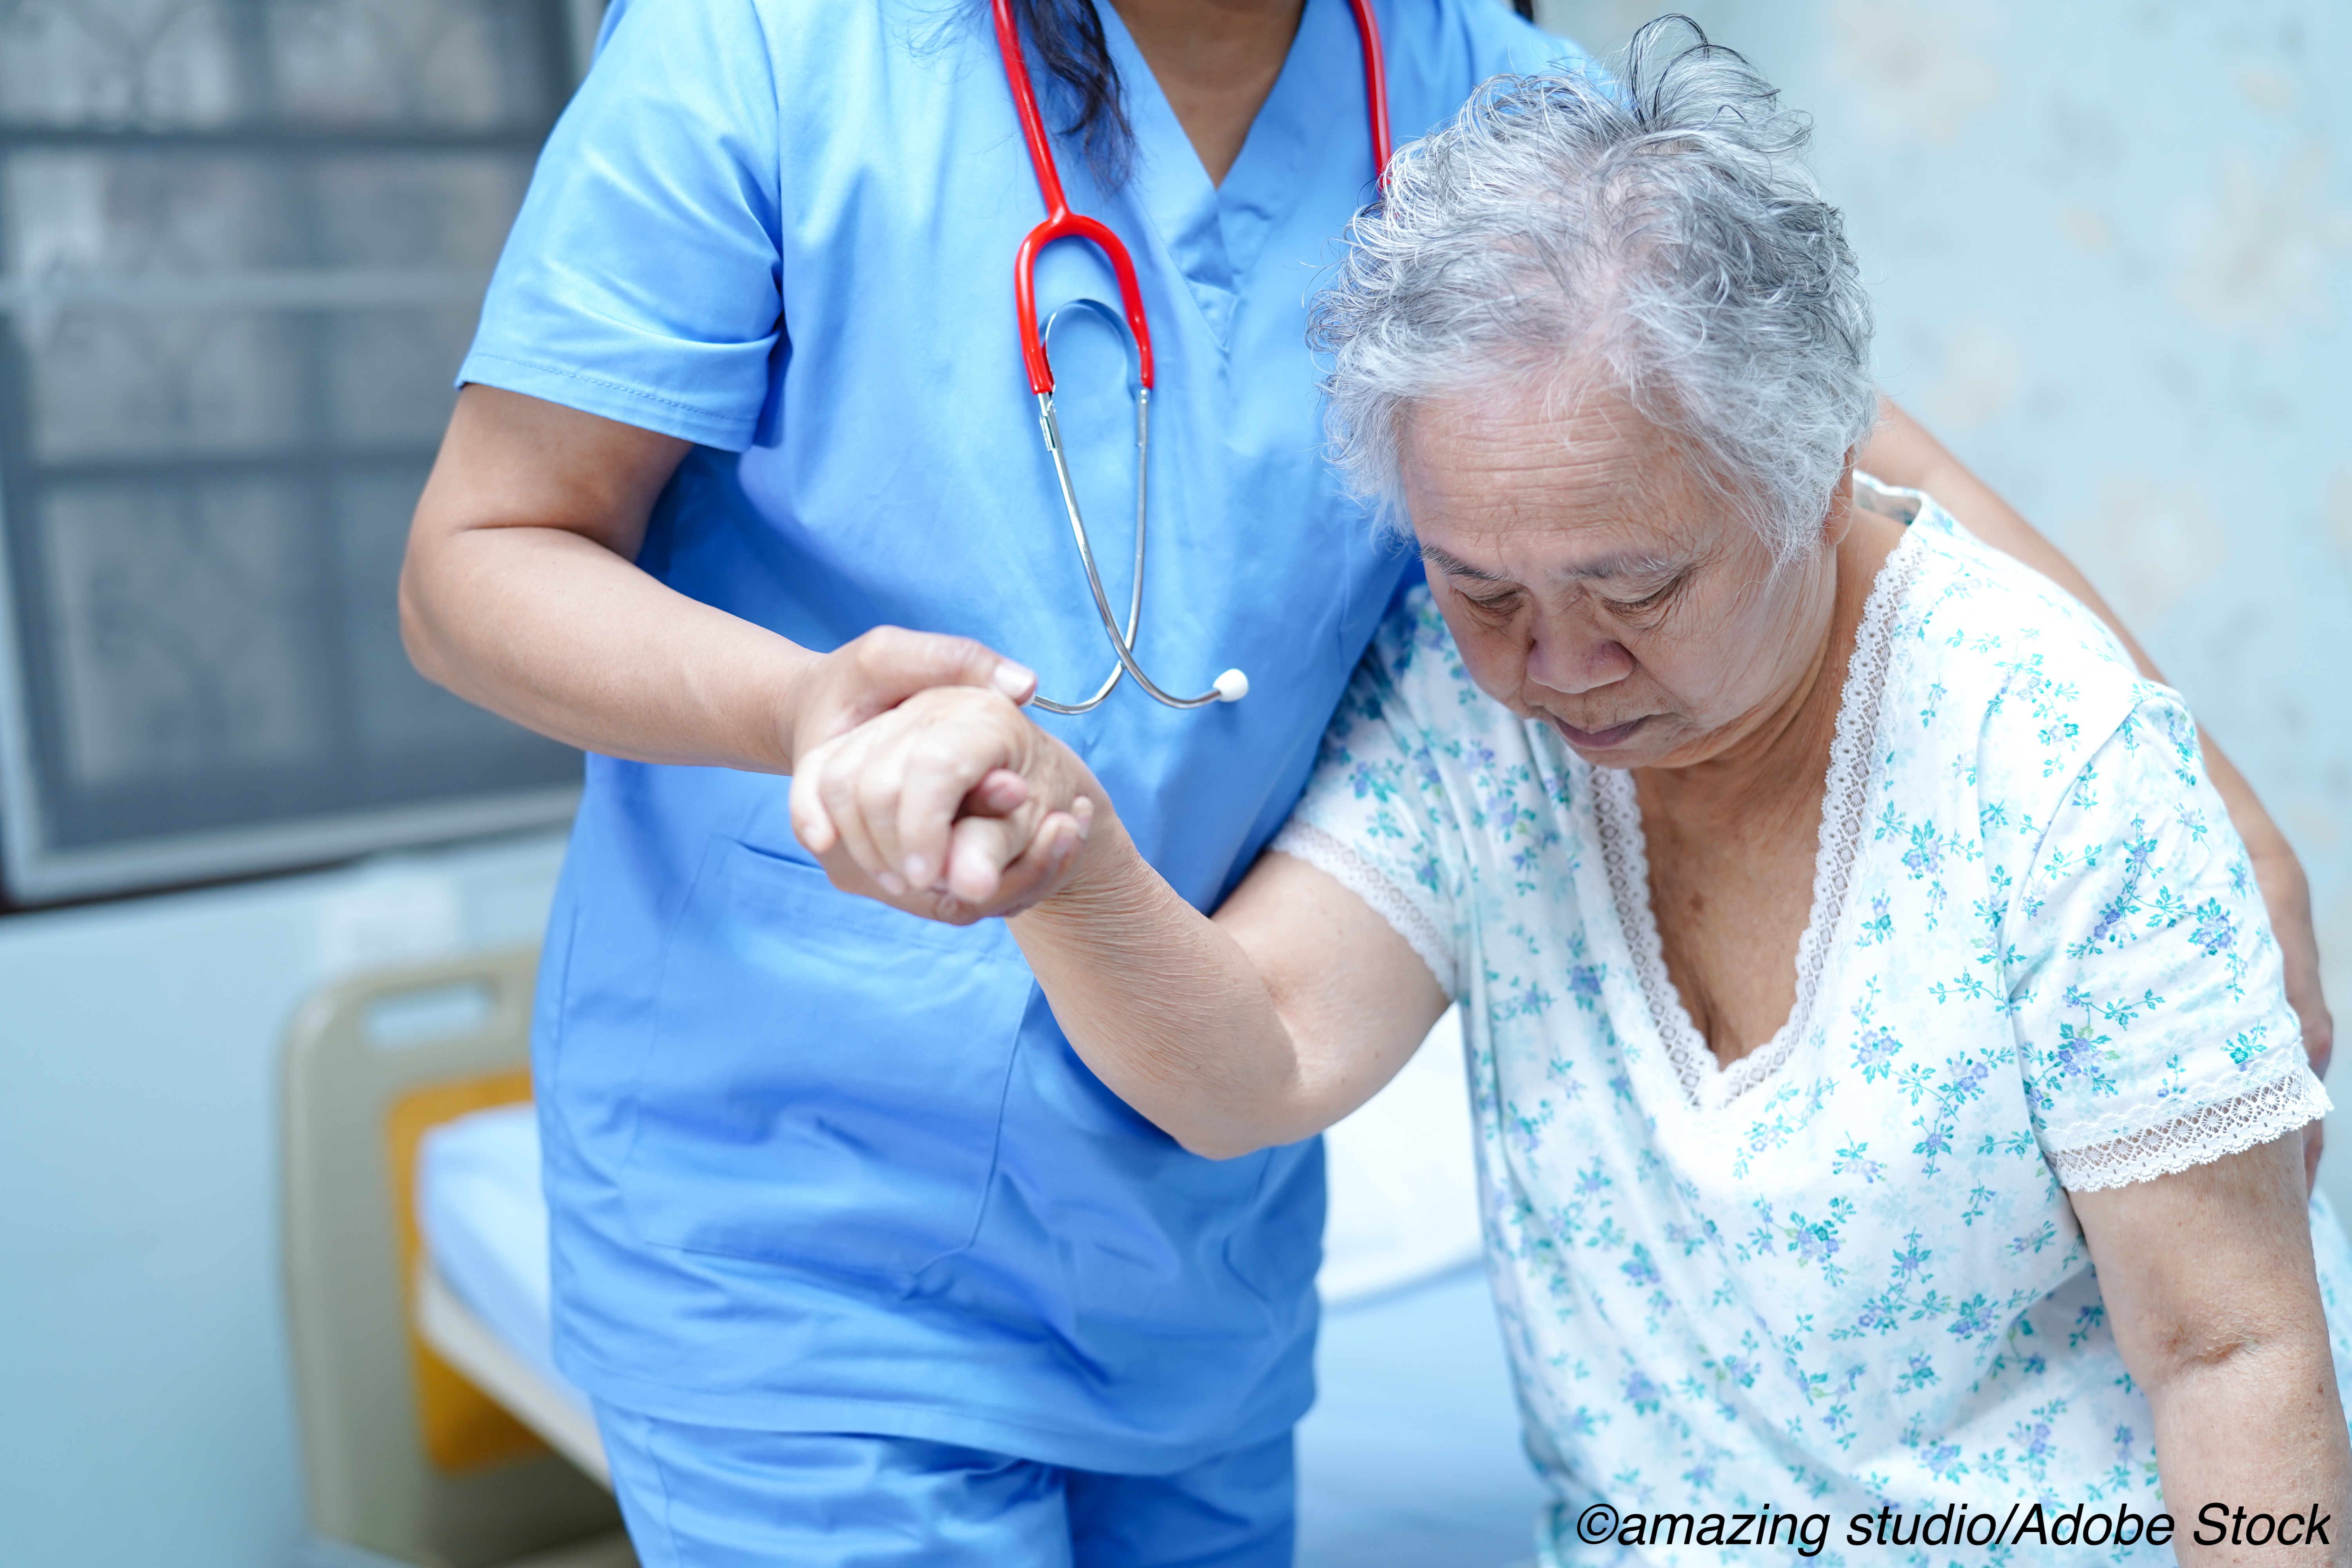 Post-Surgical Functional Decline Affects 1 in 5 in Older Adults